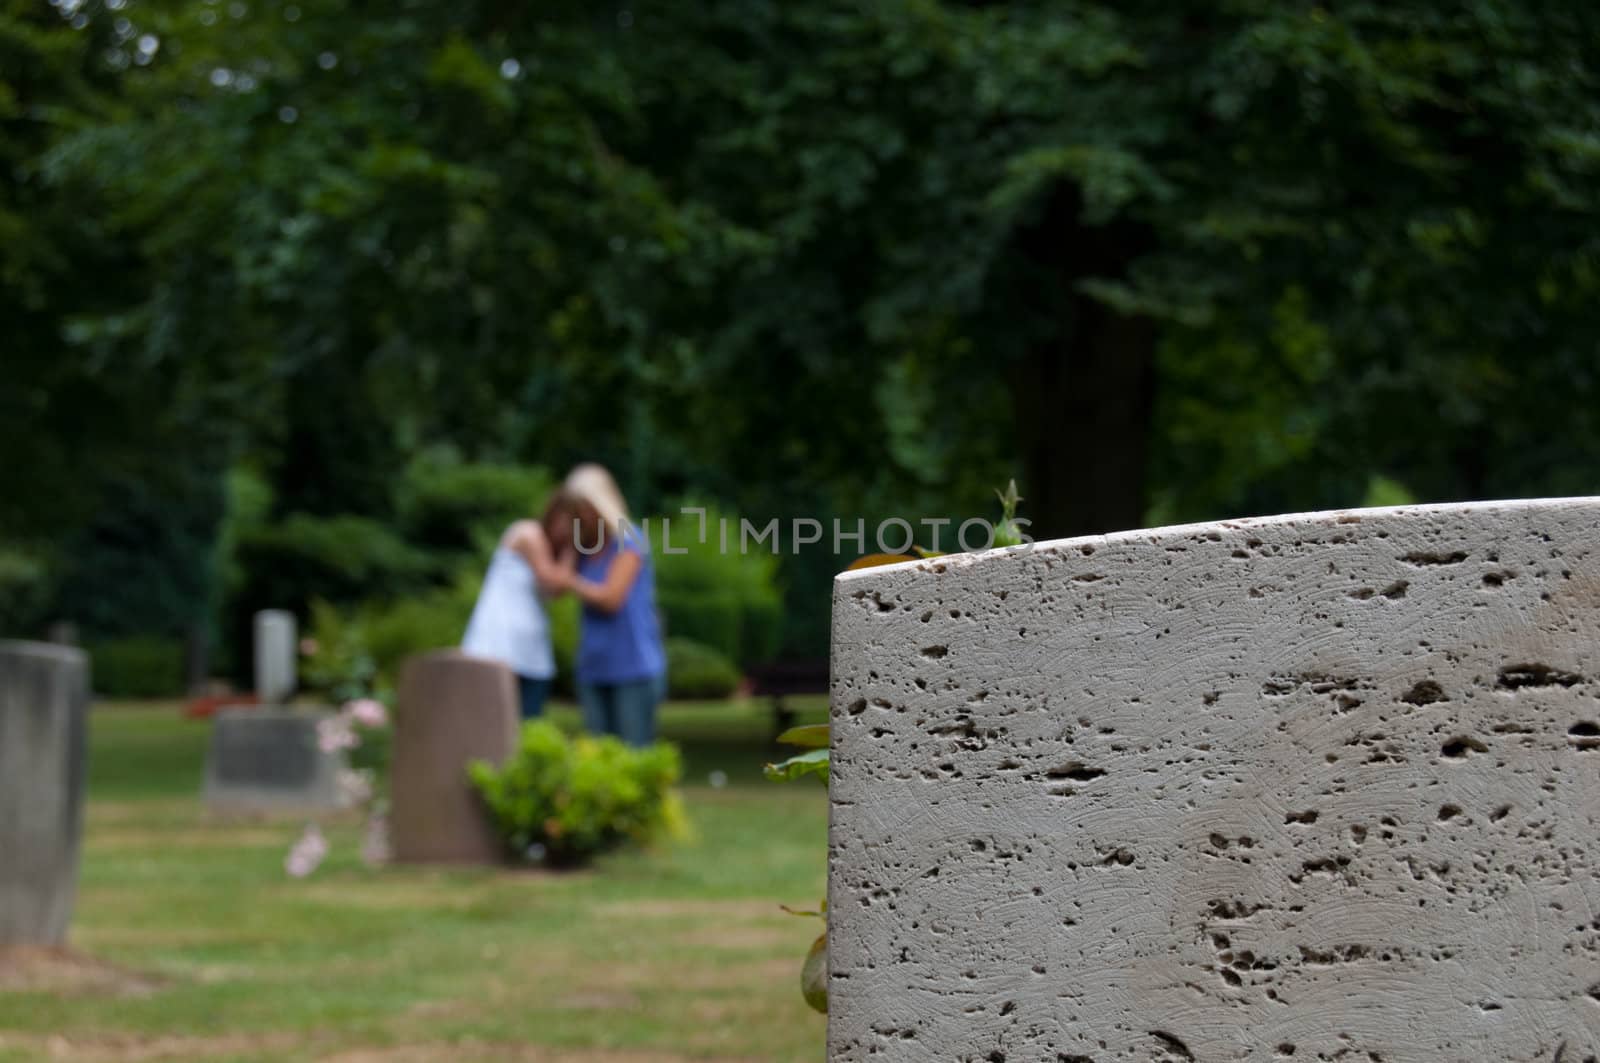 Two women mourn at the grave.